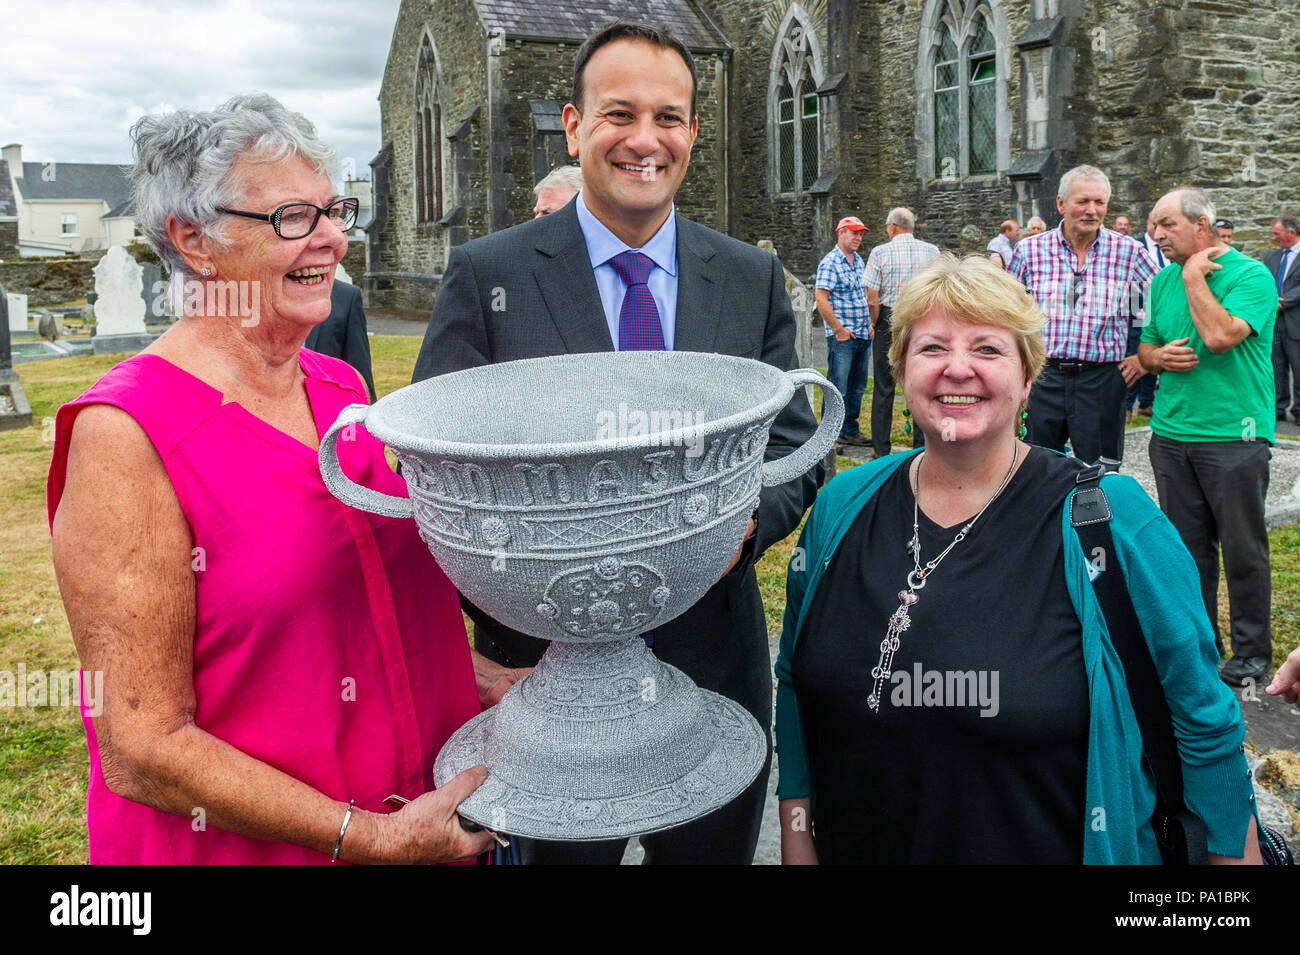 Dunmanway, West Cork, Ireland. 20th July, 2018. Taoiseach Leo Varadkar visited Dunmanway today to see the birthplace and final resting place of Sam Maguire. He also visited the Sam Maguire Bells in St. Mary's Church. The Taoiseach was shown a knitted version of the Sam Maguire trophy, made by local ladies. Credit: AG News/Alamy Live News. Stock Photo